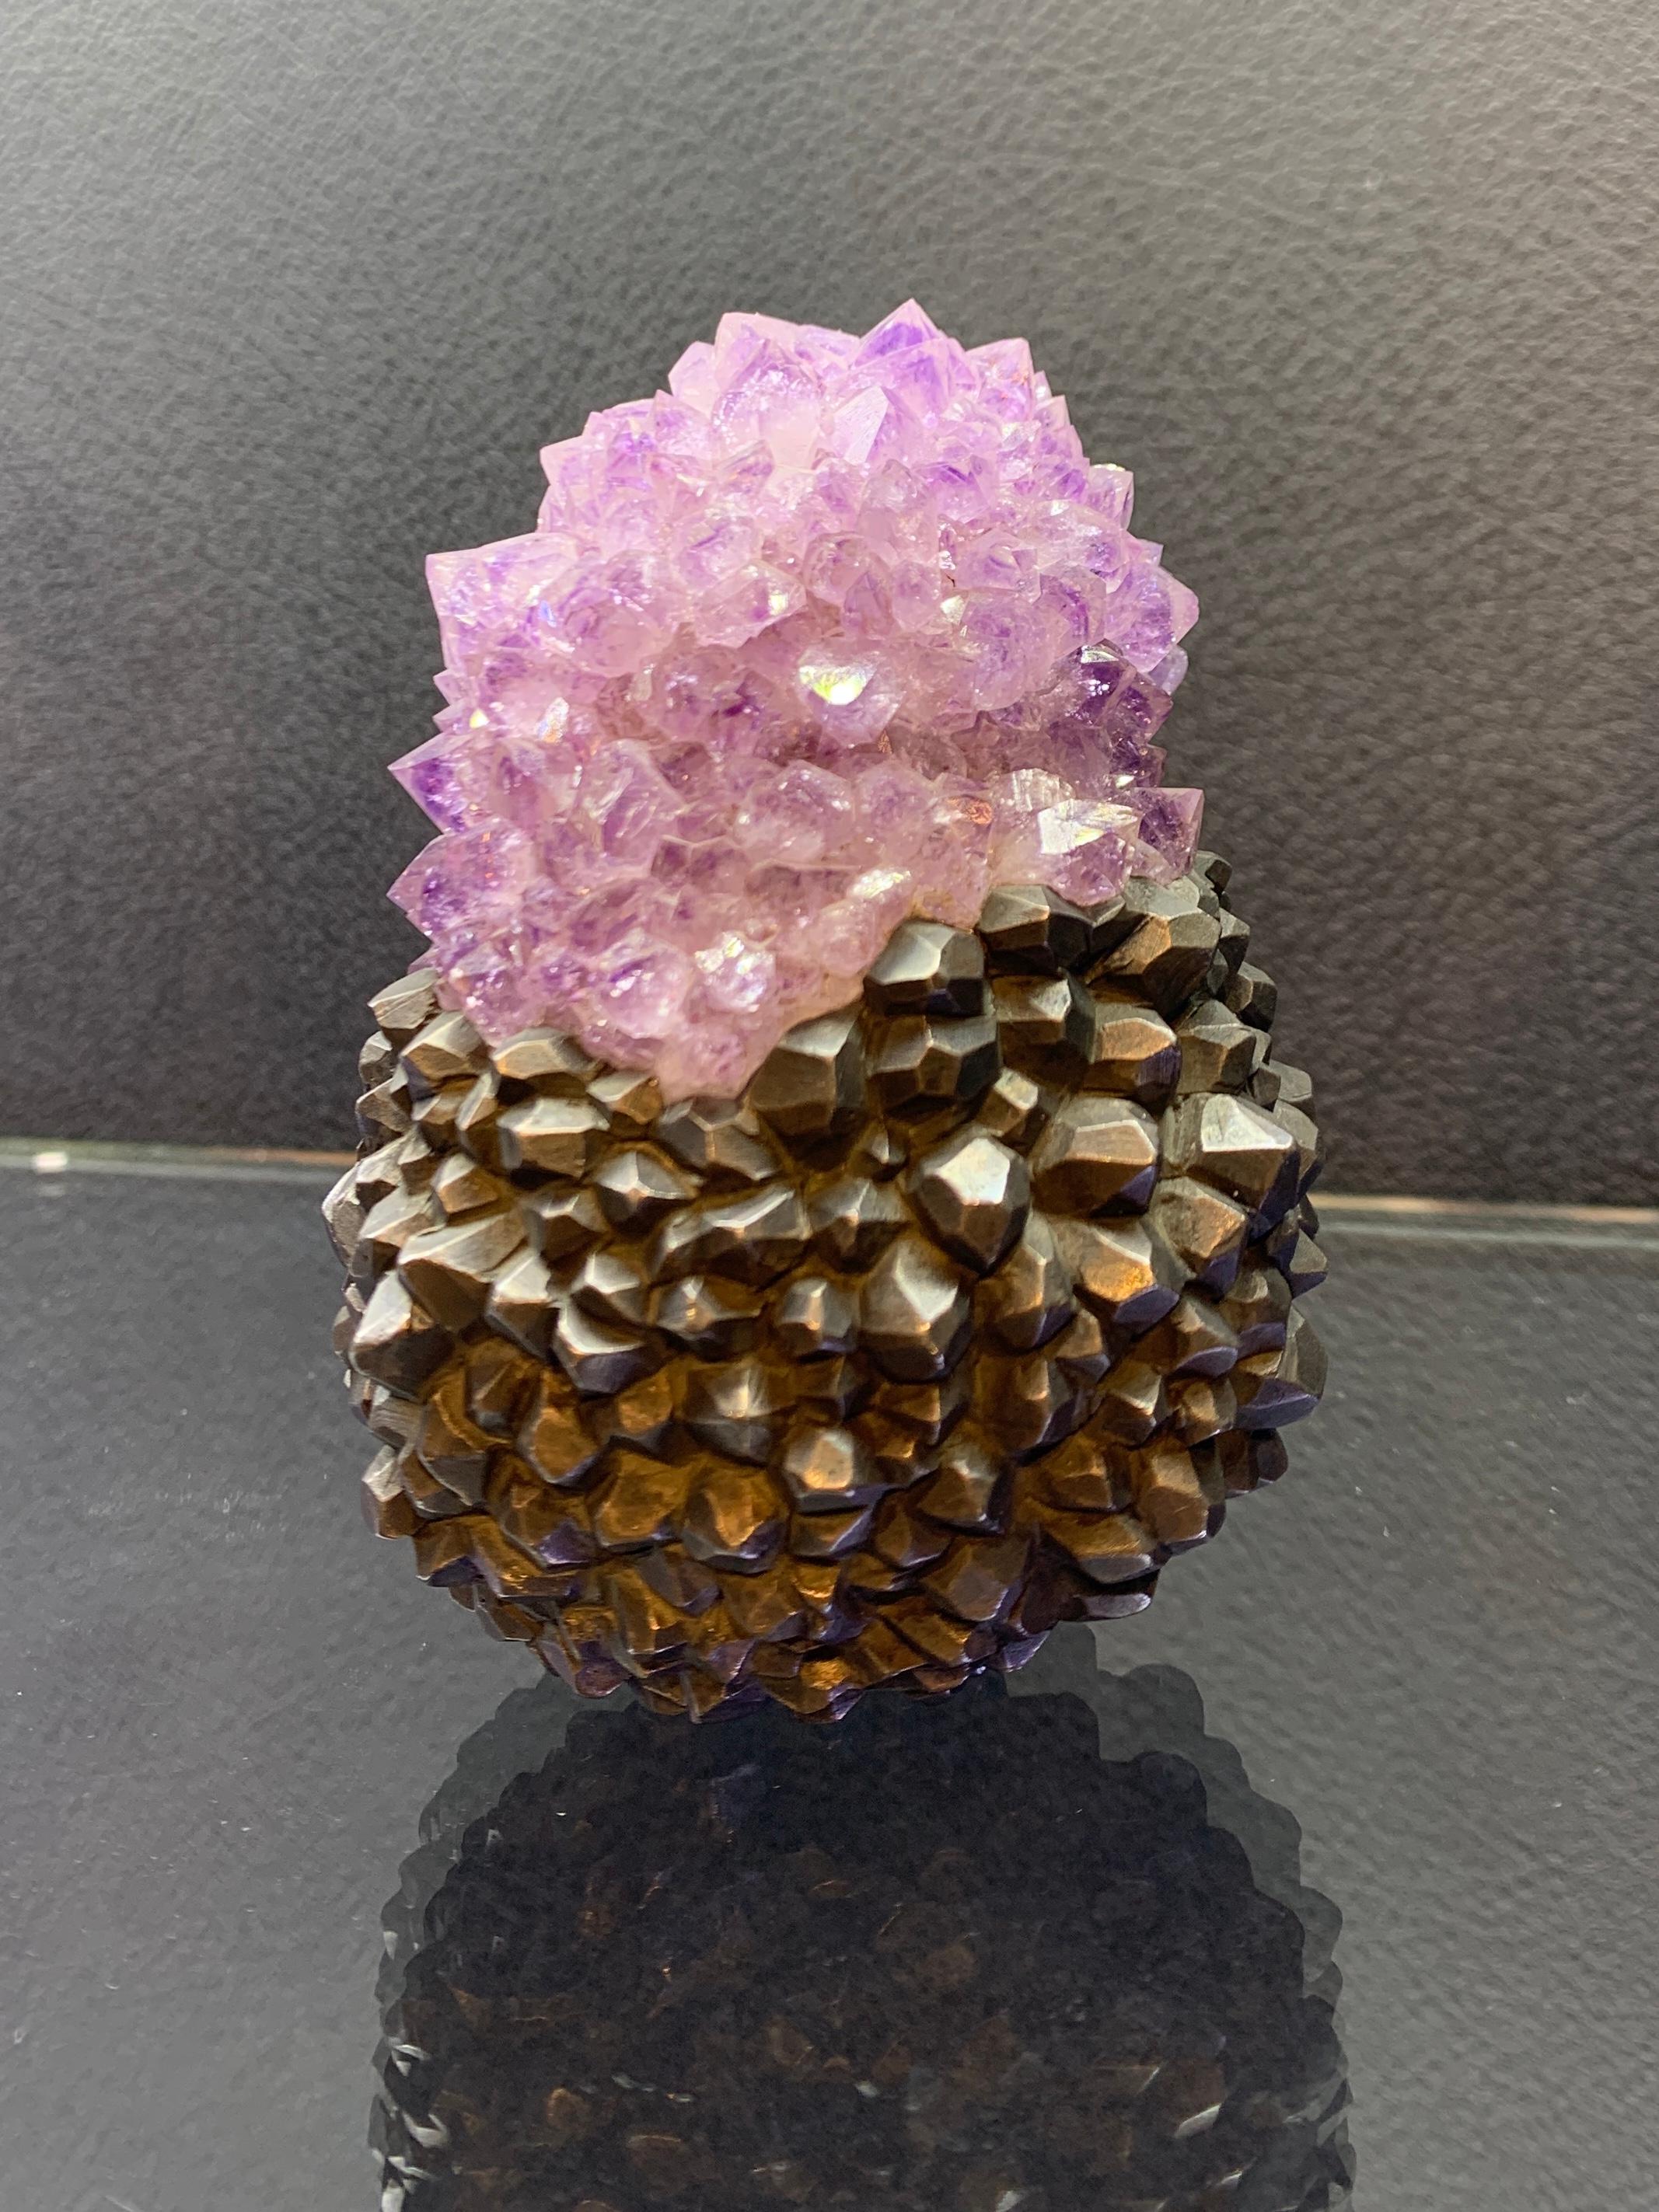 Group of Six Amethyst Crystals & Silver Objects by Jar 12